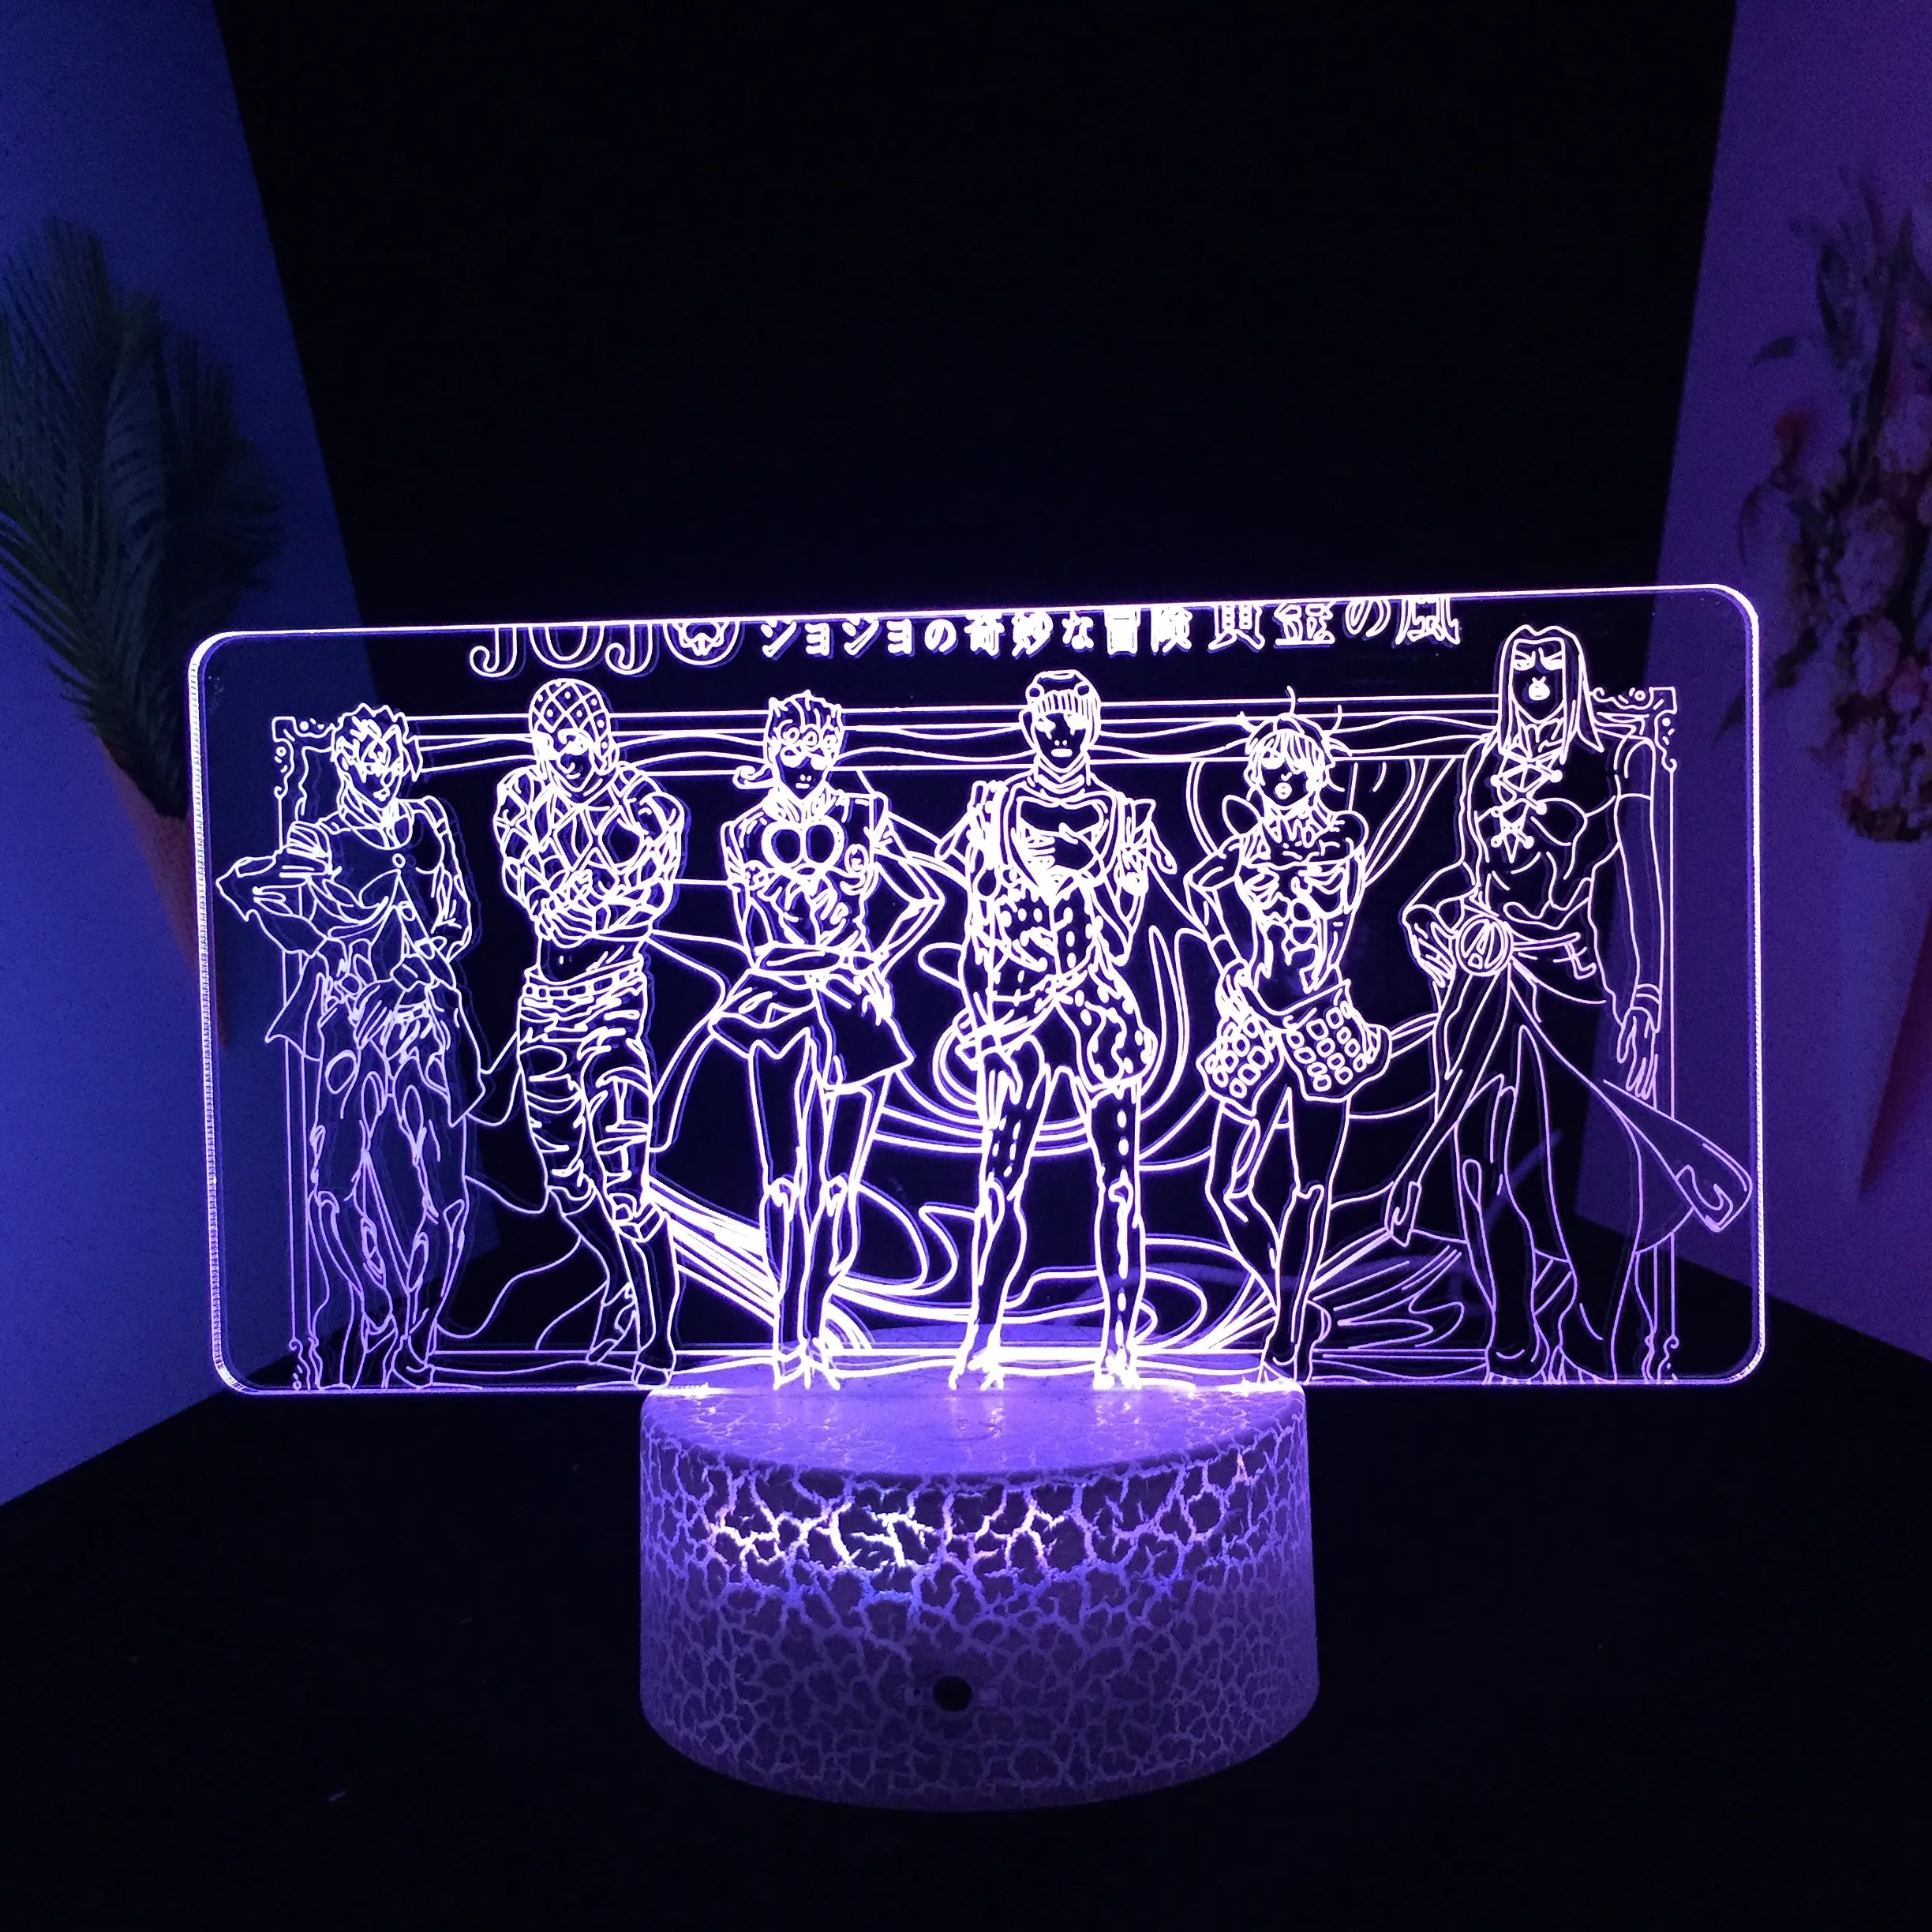 

Japanese Anime Character Gathering 3D LED Lamp Visual Illusion White Cracked BaseHome Decor for Couple Festival Birthday Gifts